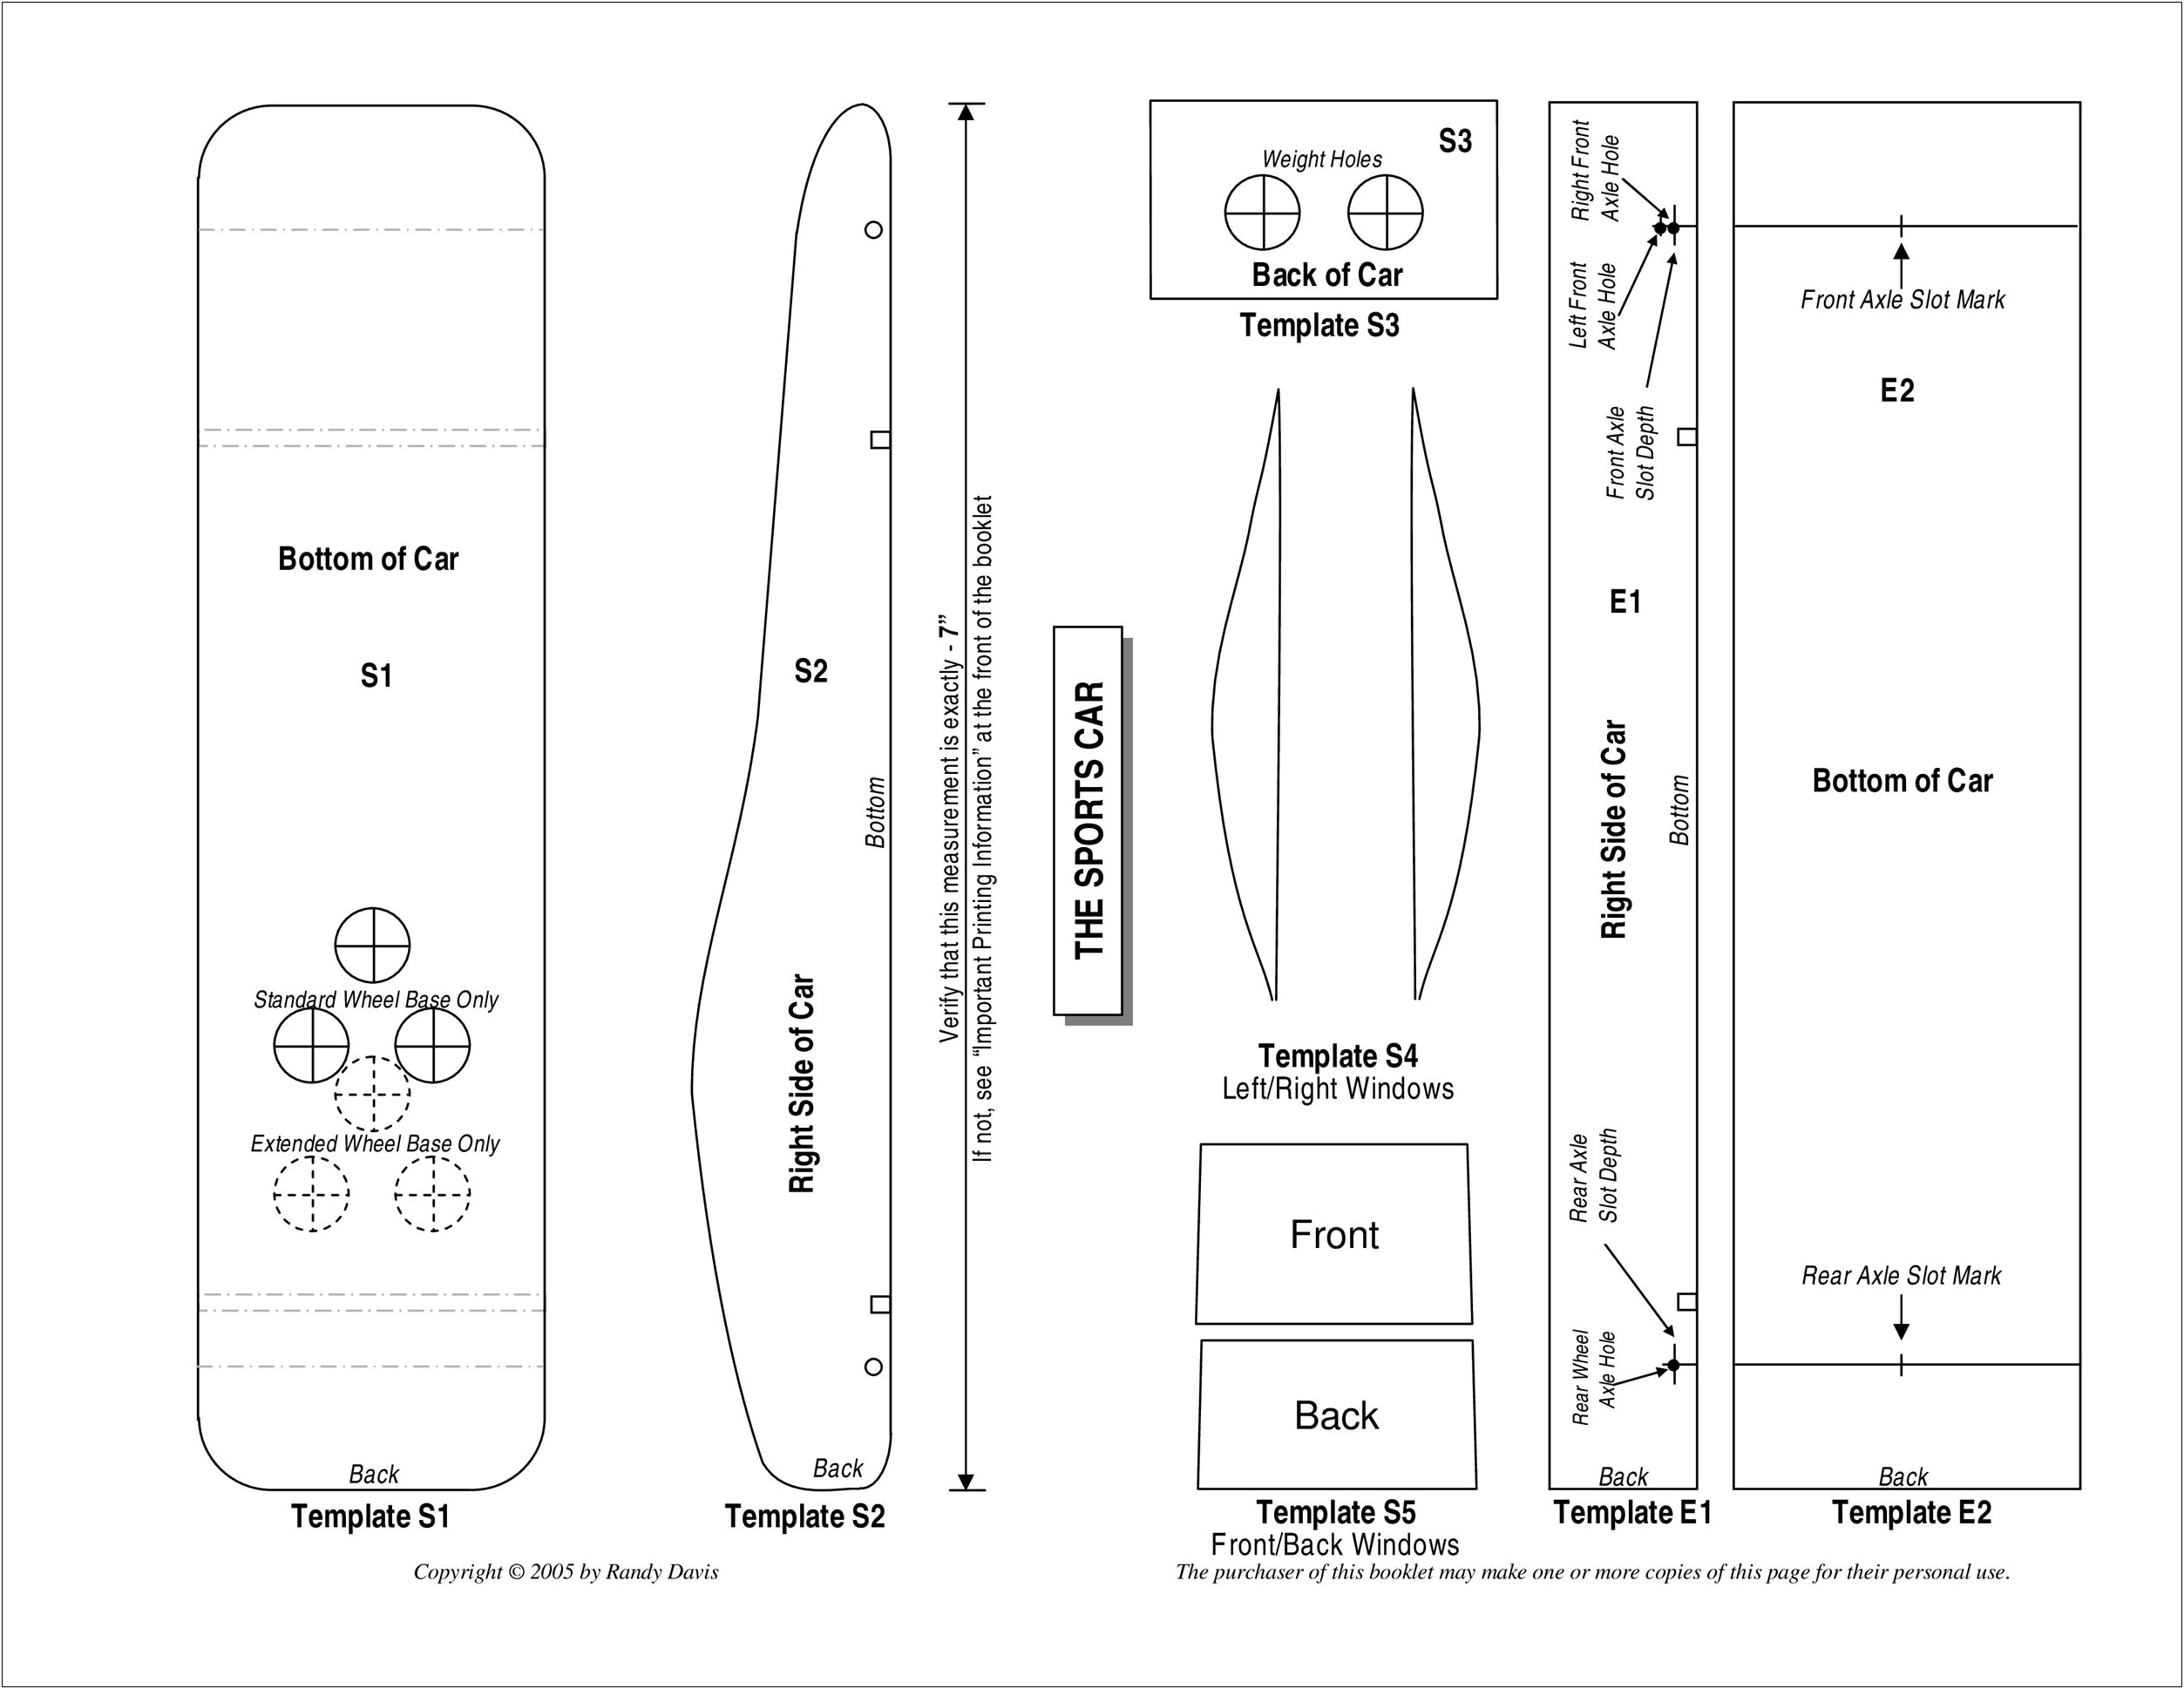 Pinewood Derby Car Designs Free Template